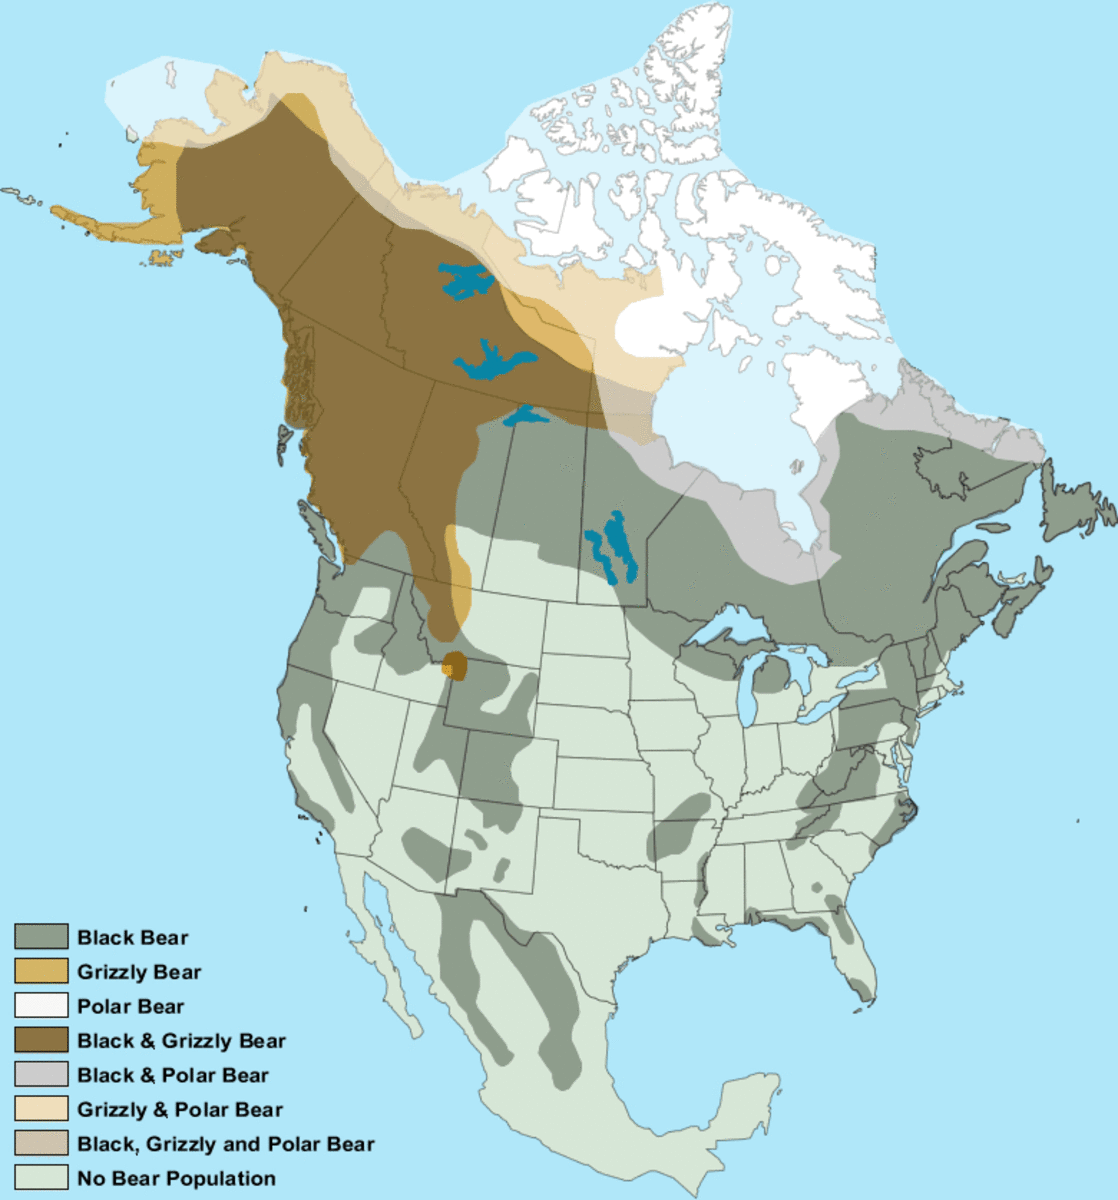 Map showing the distribution of various bear species in North America